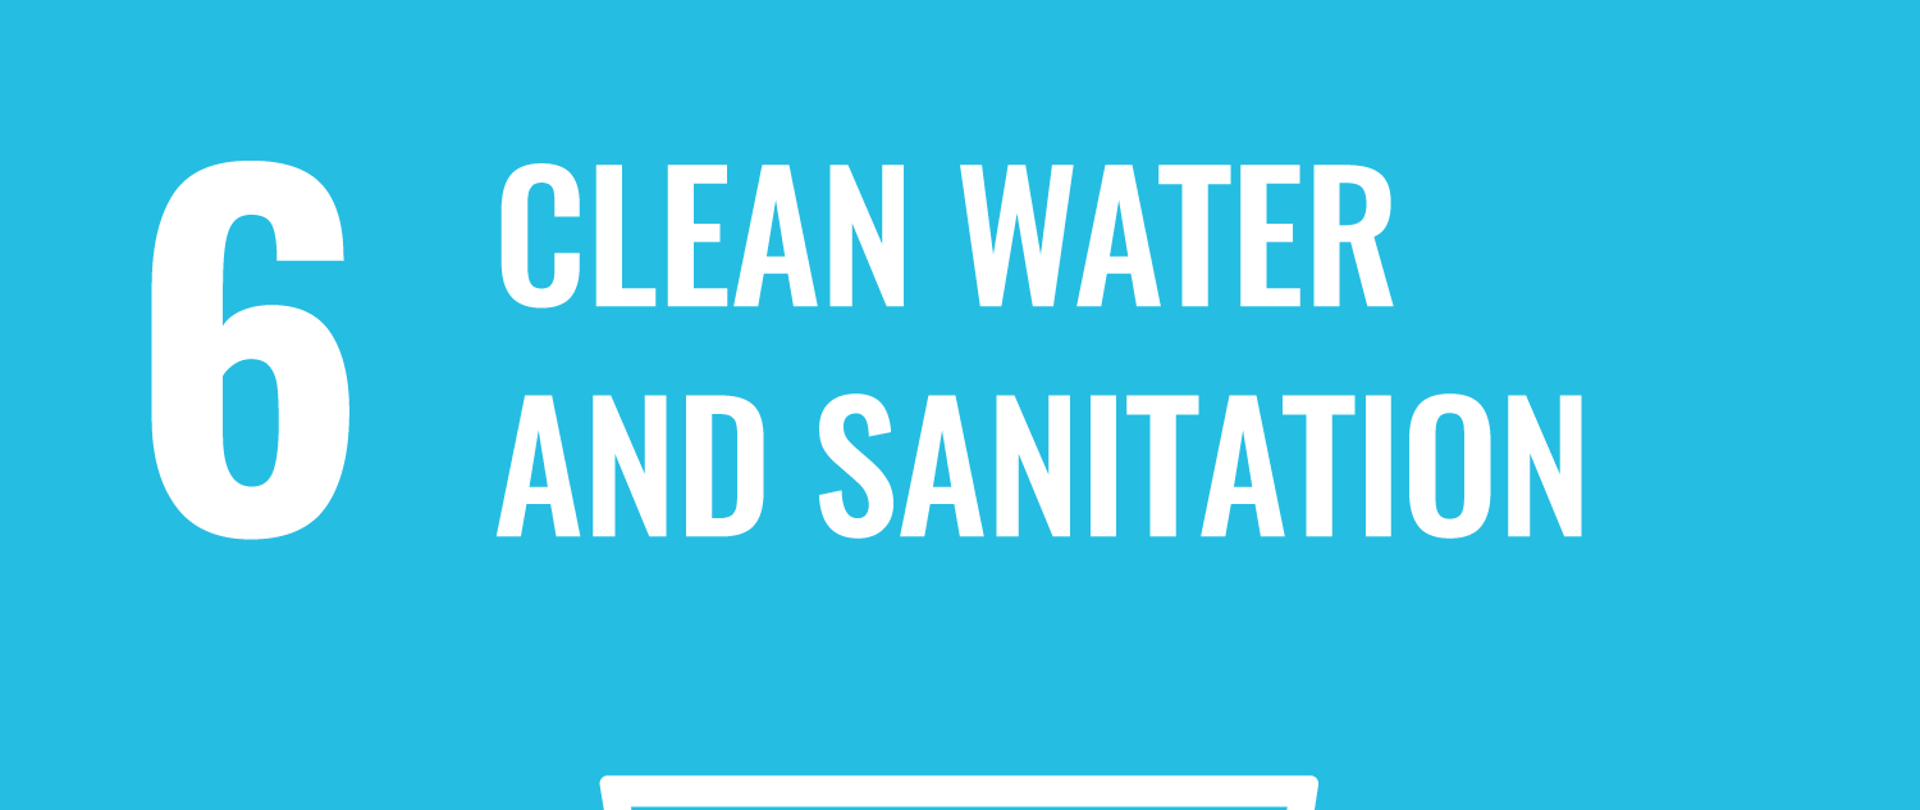 6 Clean water and sanitation